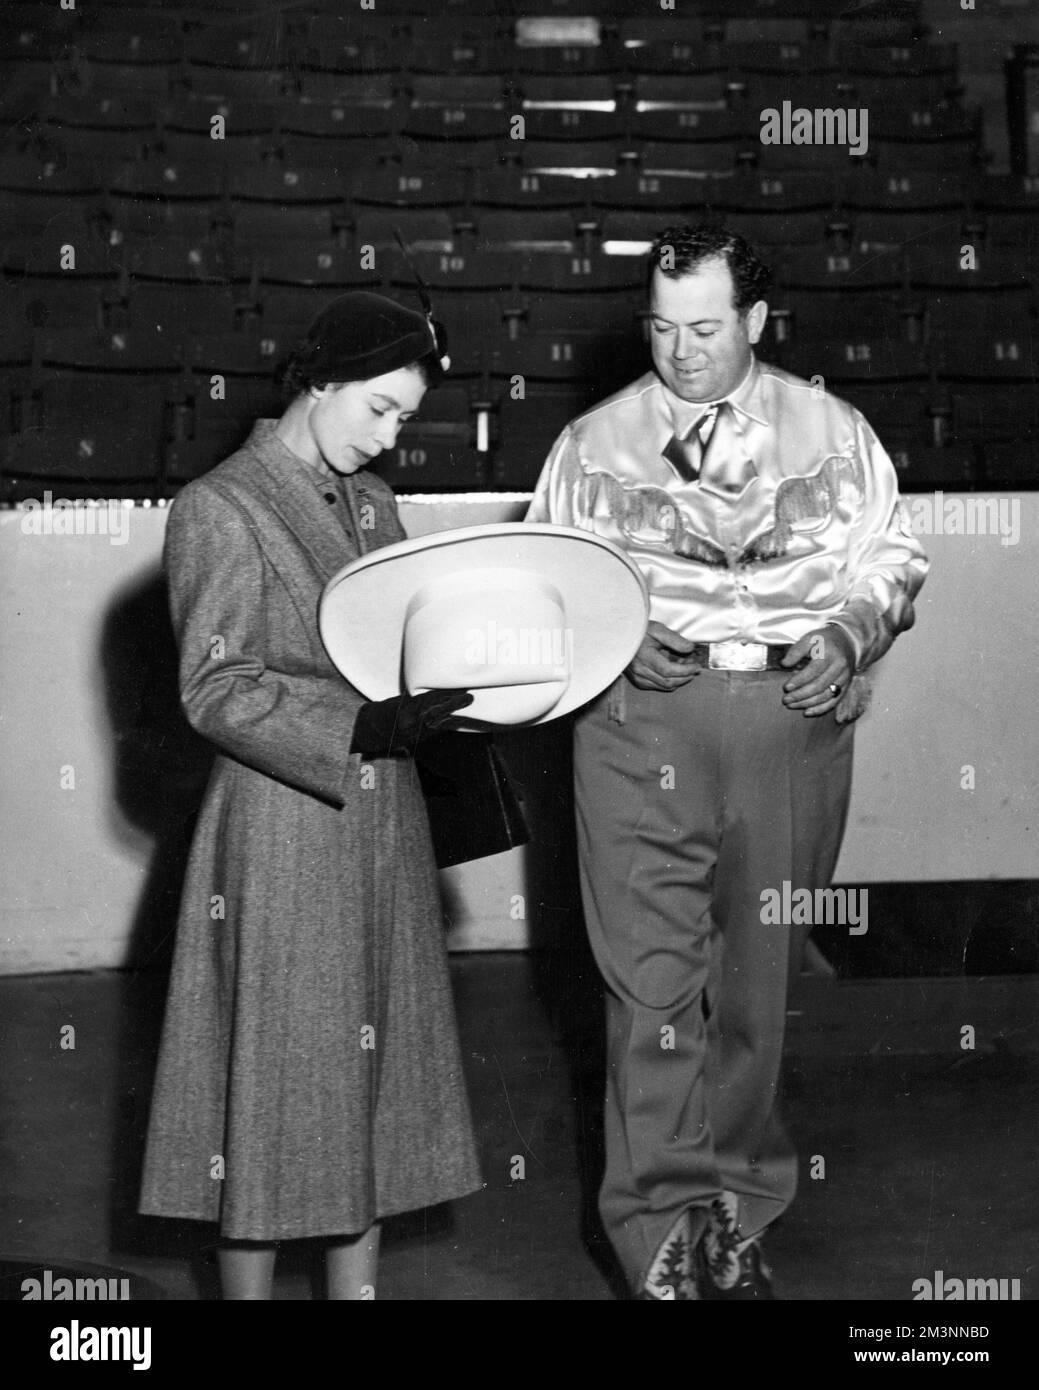 The Mayor of Calgary(Alberta), Mr Don Mackay, is here seen showing Princess Elizabeth a 'ten gallon' hat, when her Royal Highness and the Duke of Edinburgh(who was presented with, and wore, a 'ten gallon' hat), visited Calgary to attend a rodeo in the stadium.     Date: 1951 Stock Photo